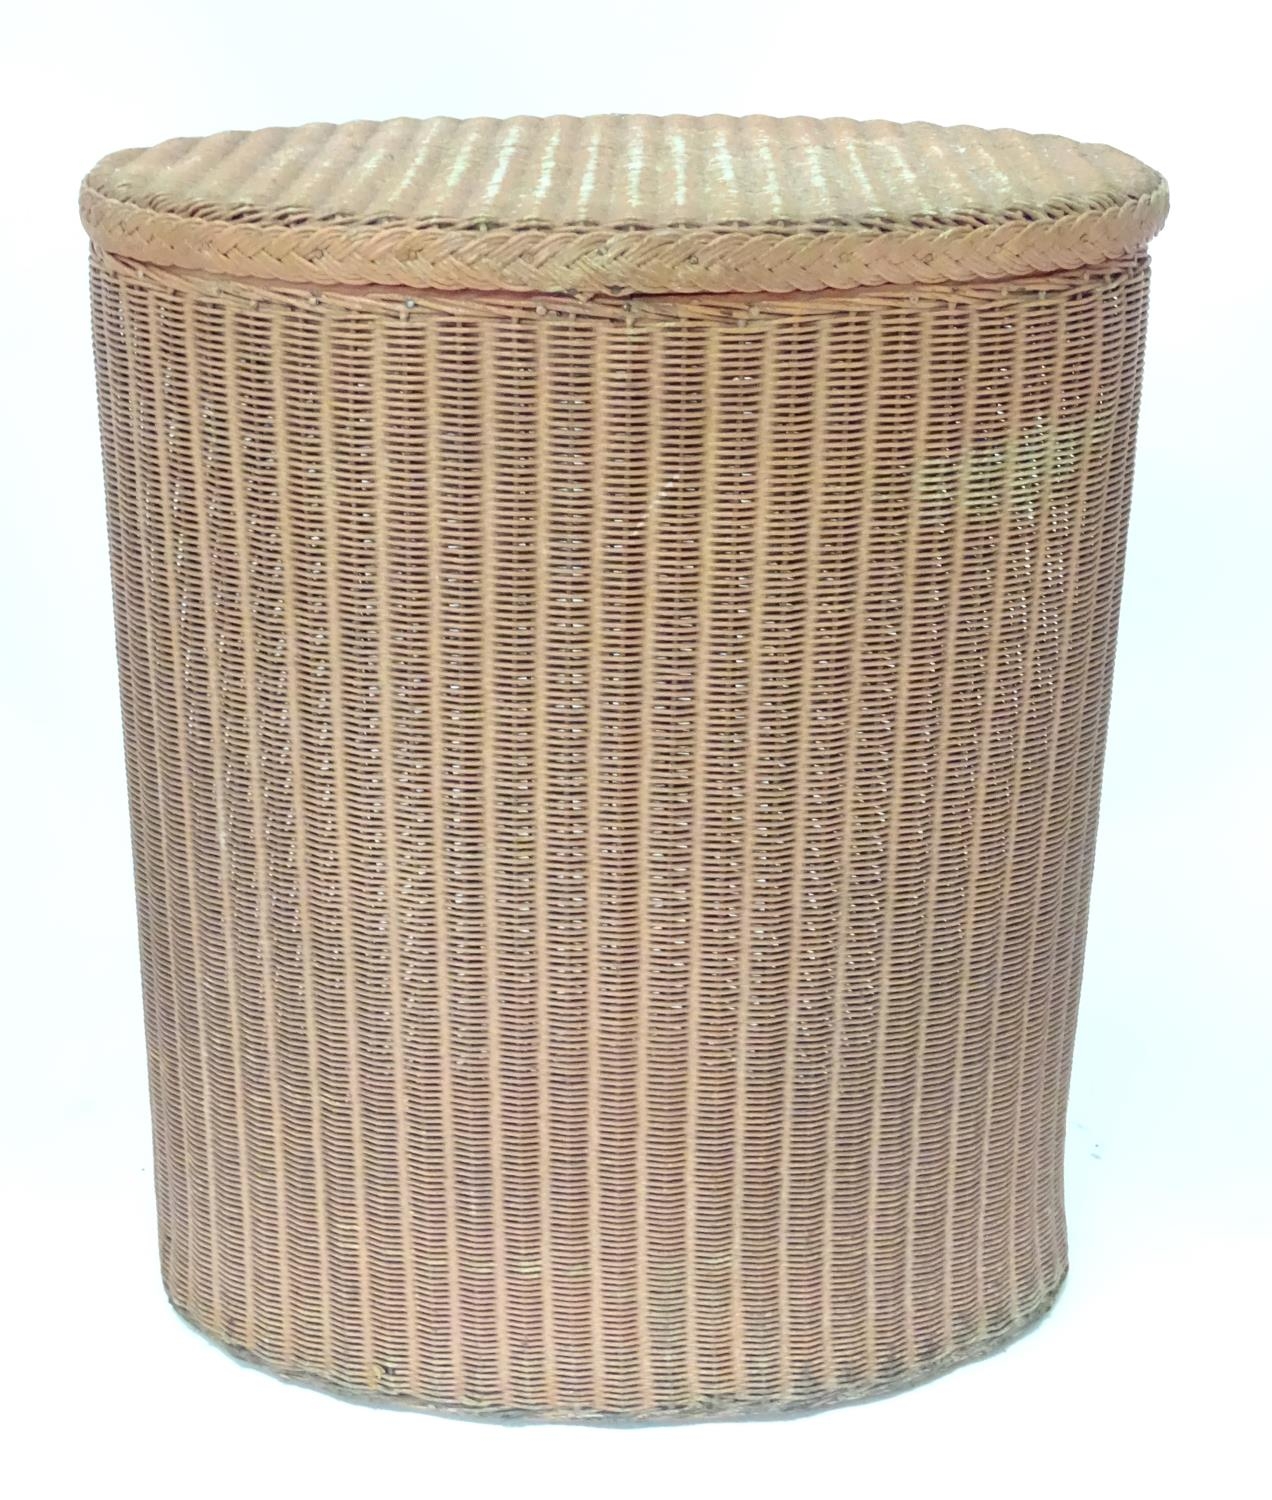 A Lloyd Loom style linen basket of oval form Please Note - we do not make reference to the condition